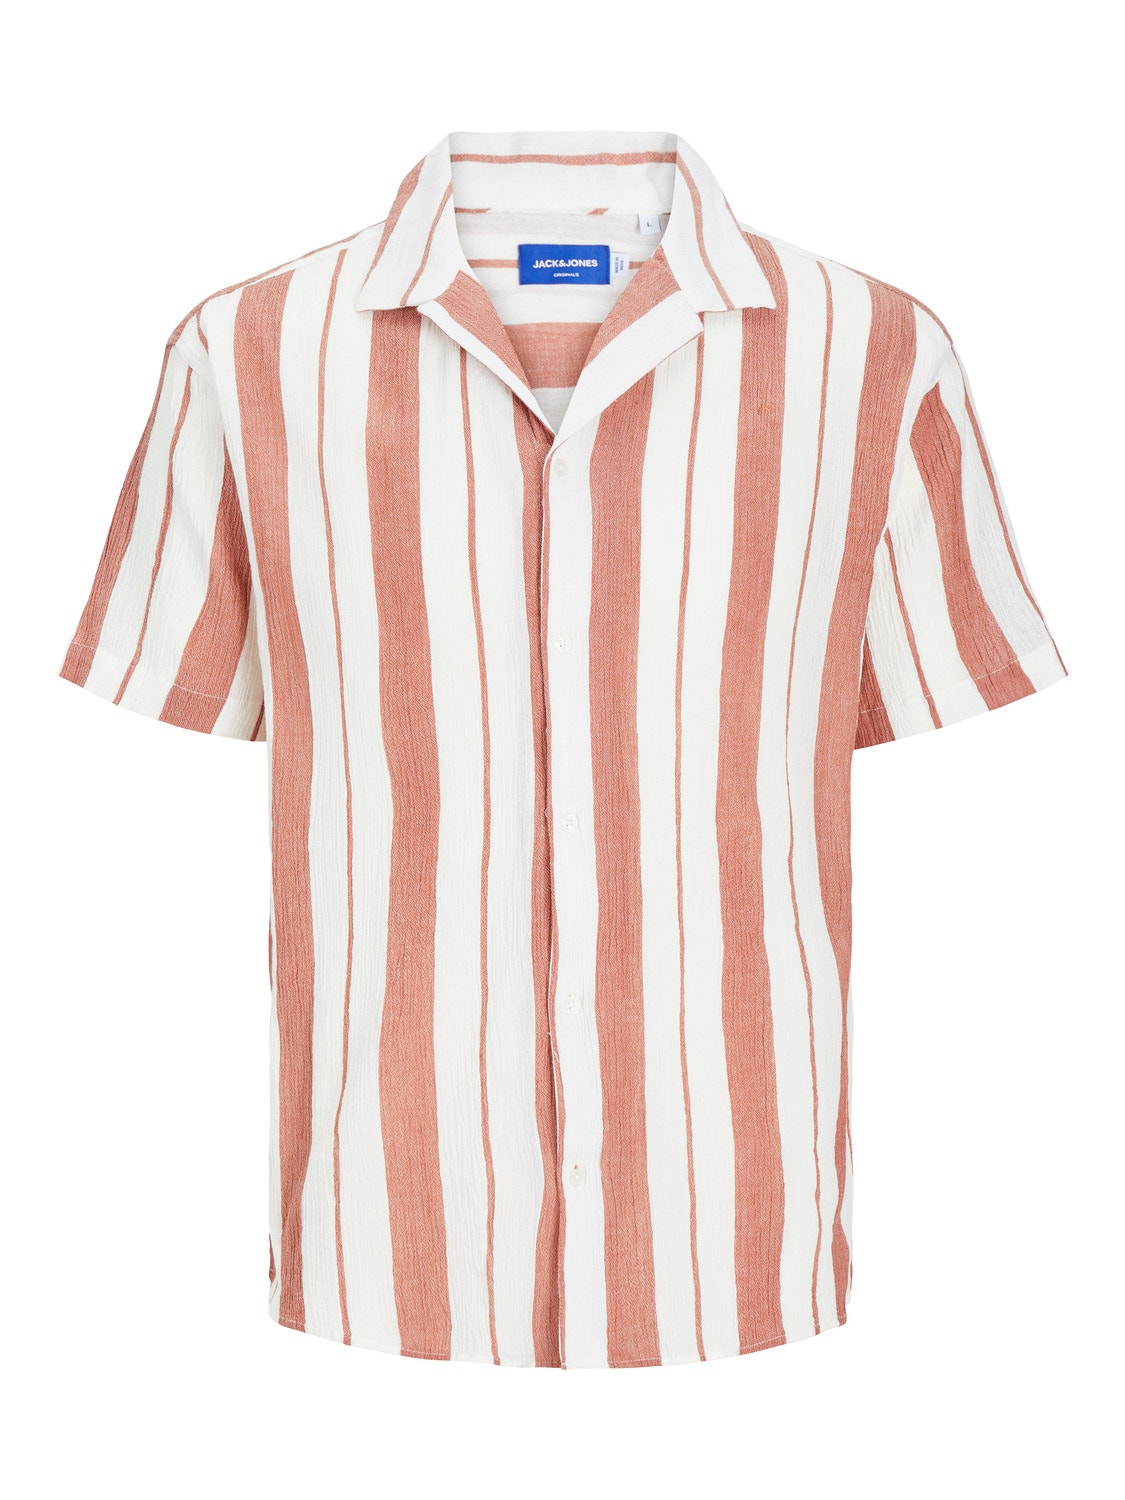 Jack & Jones Relaxed Fit Resort shirt -Maple Syrup - 12255235